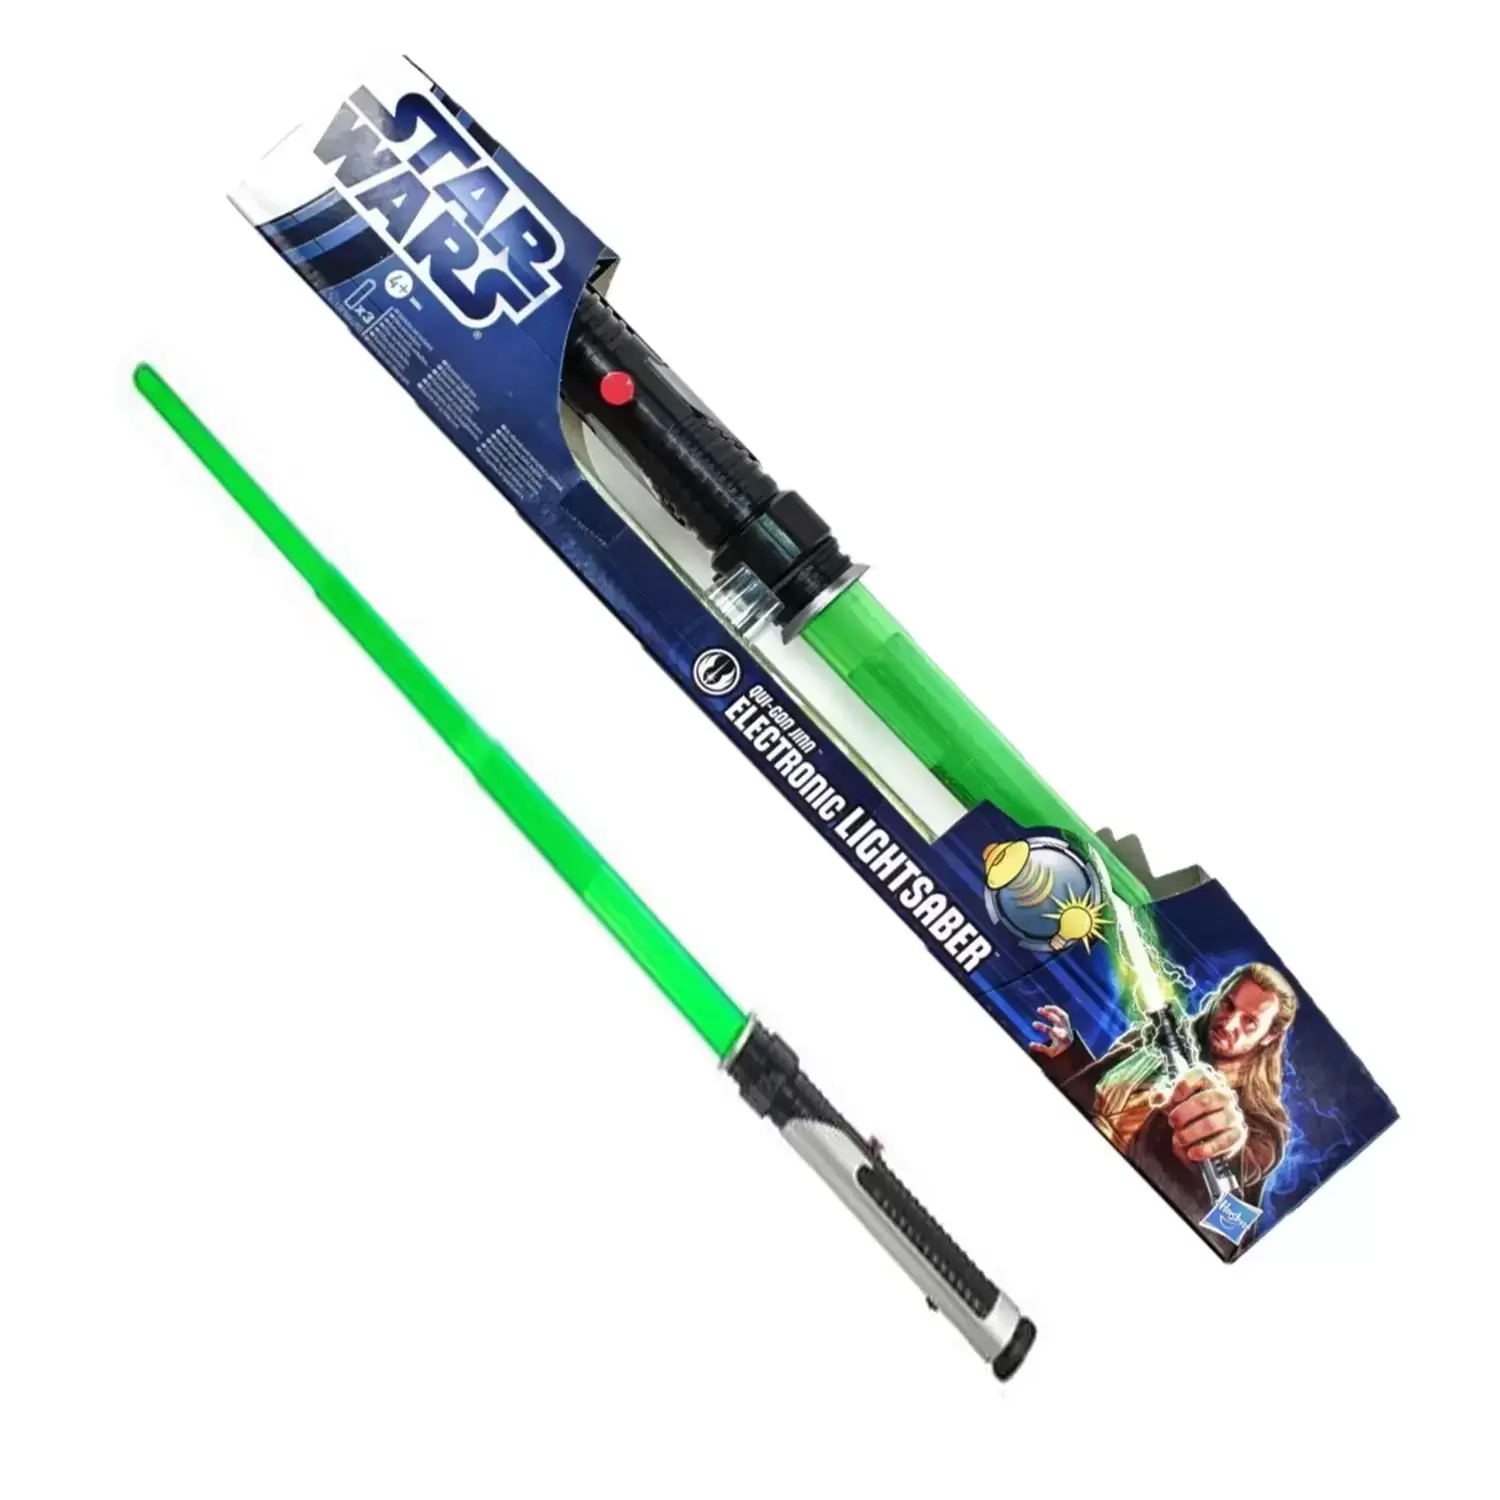 Lightsabers And Roleplay Items - Qui Gon Jin Electronic Lightsaber